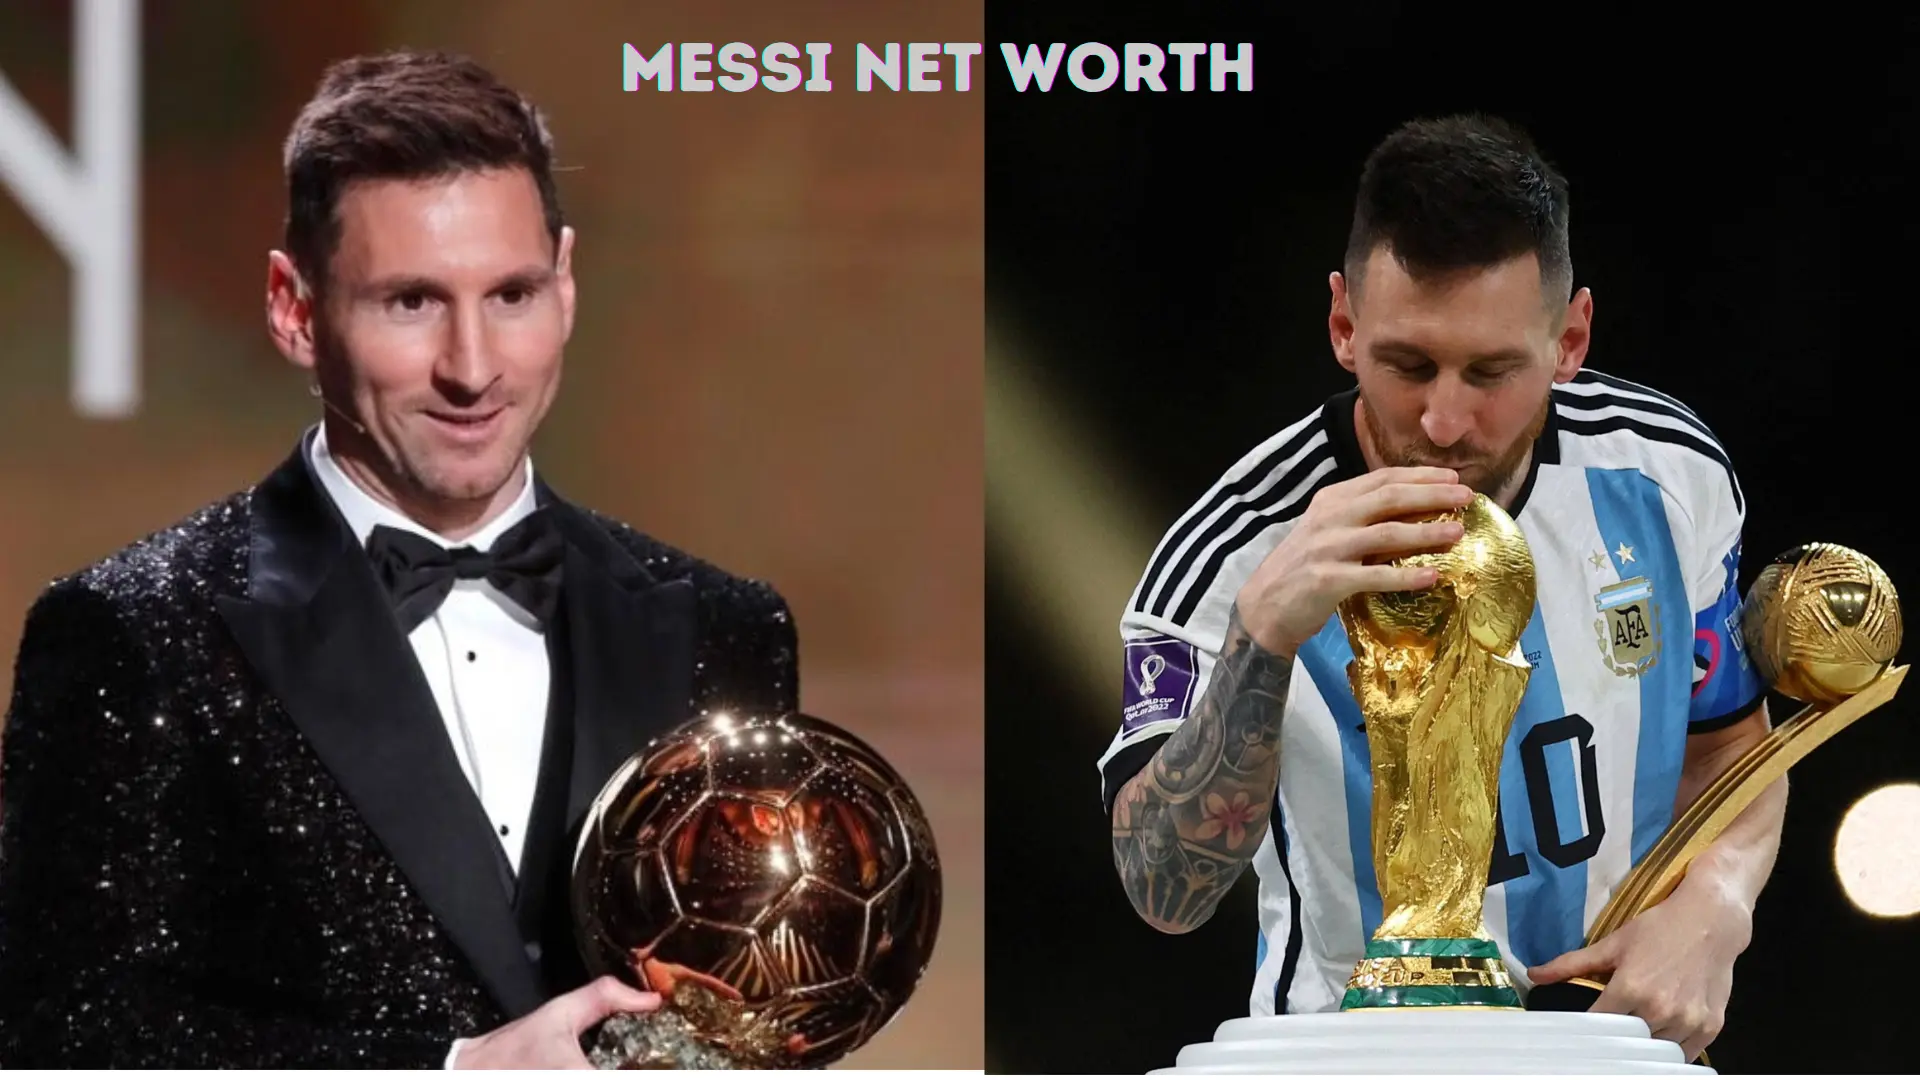 Networth of Messi